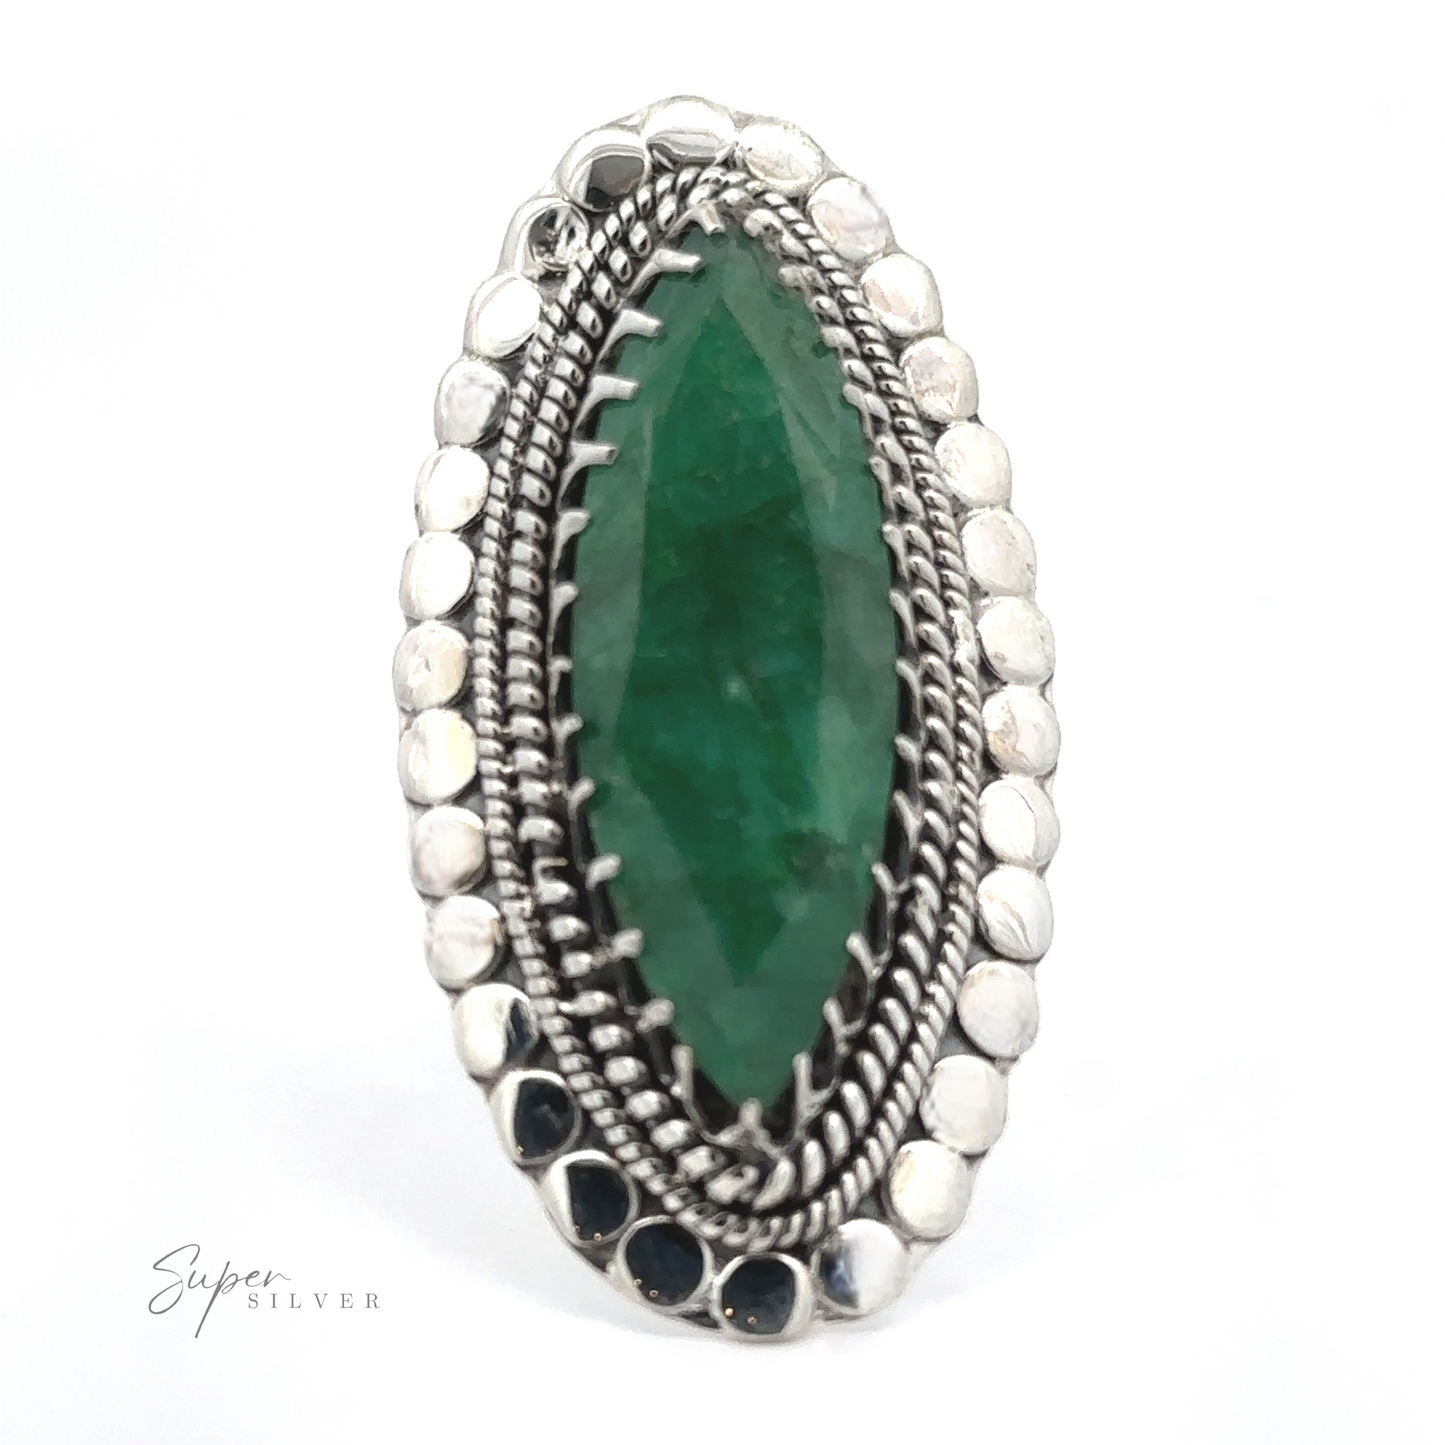 
                  
                    A Statement Marquise Shaped Gemstone Ring is shown against a white background. The design includes intricate silver detailing around the marquise-shaped gemstone, evoking a touch of Bohemian jewelry elegance.
                  
                